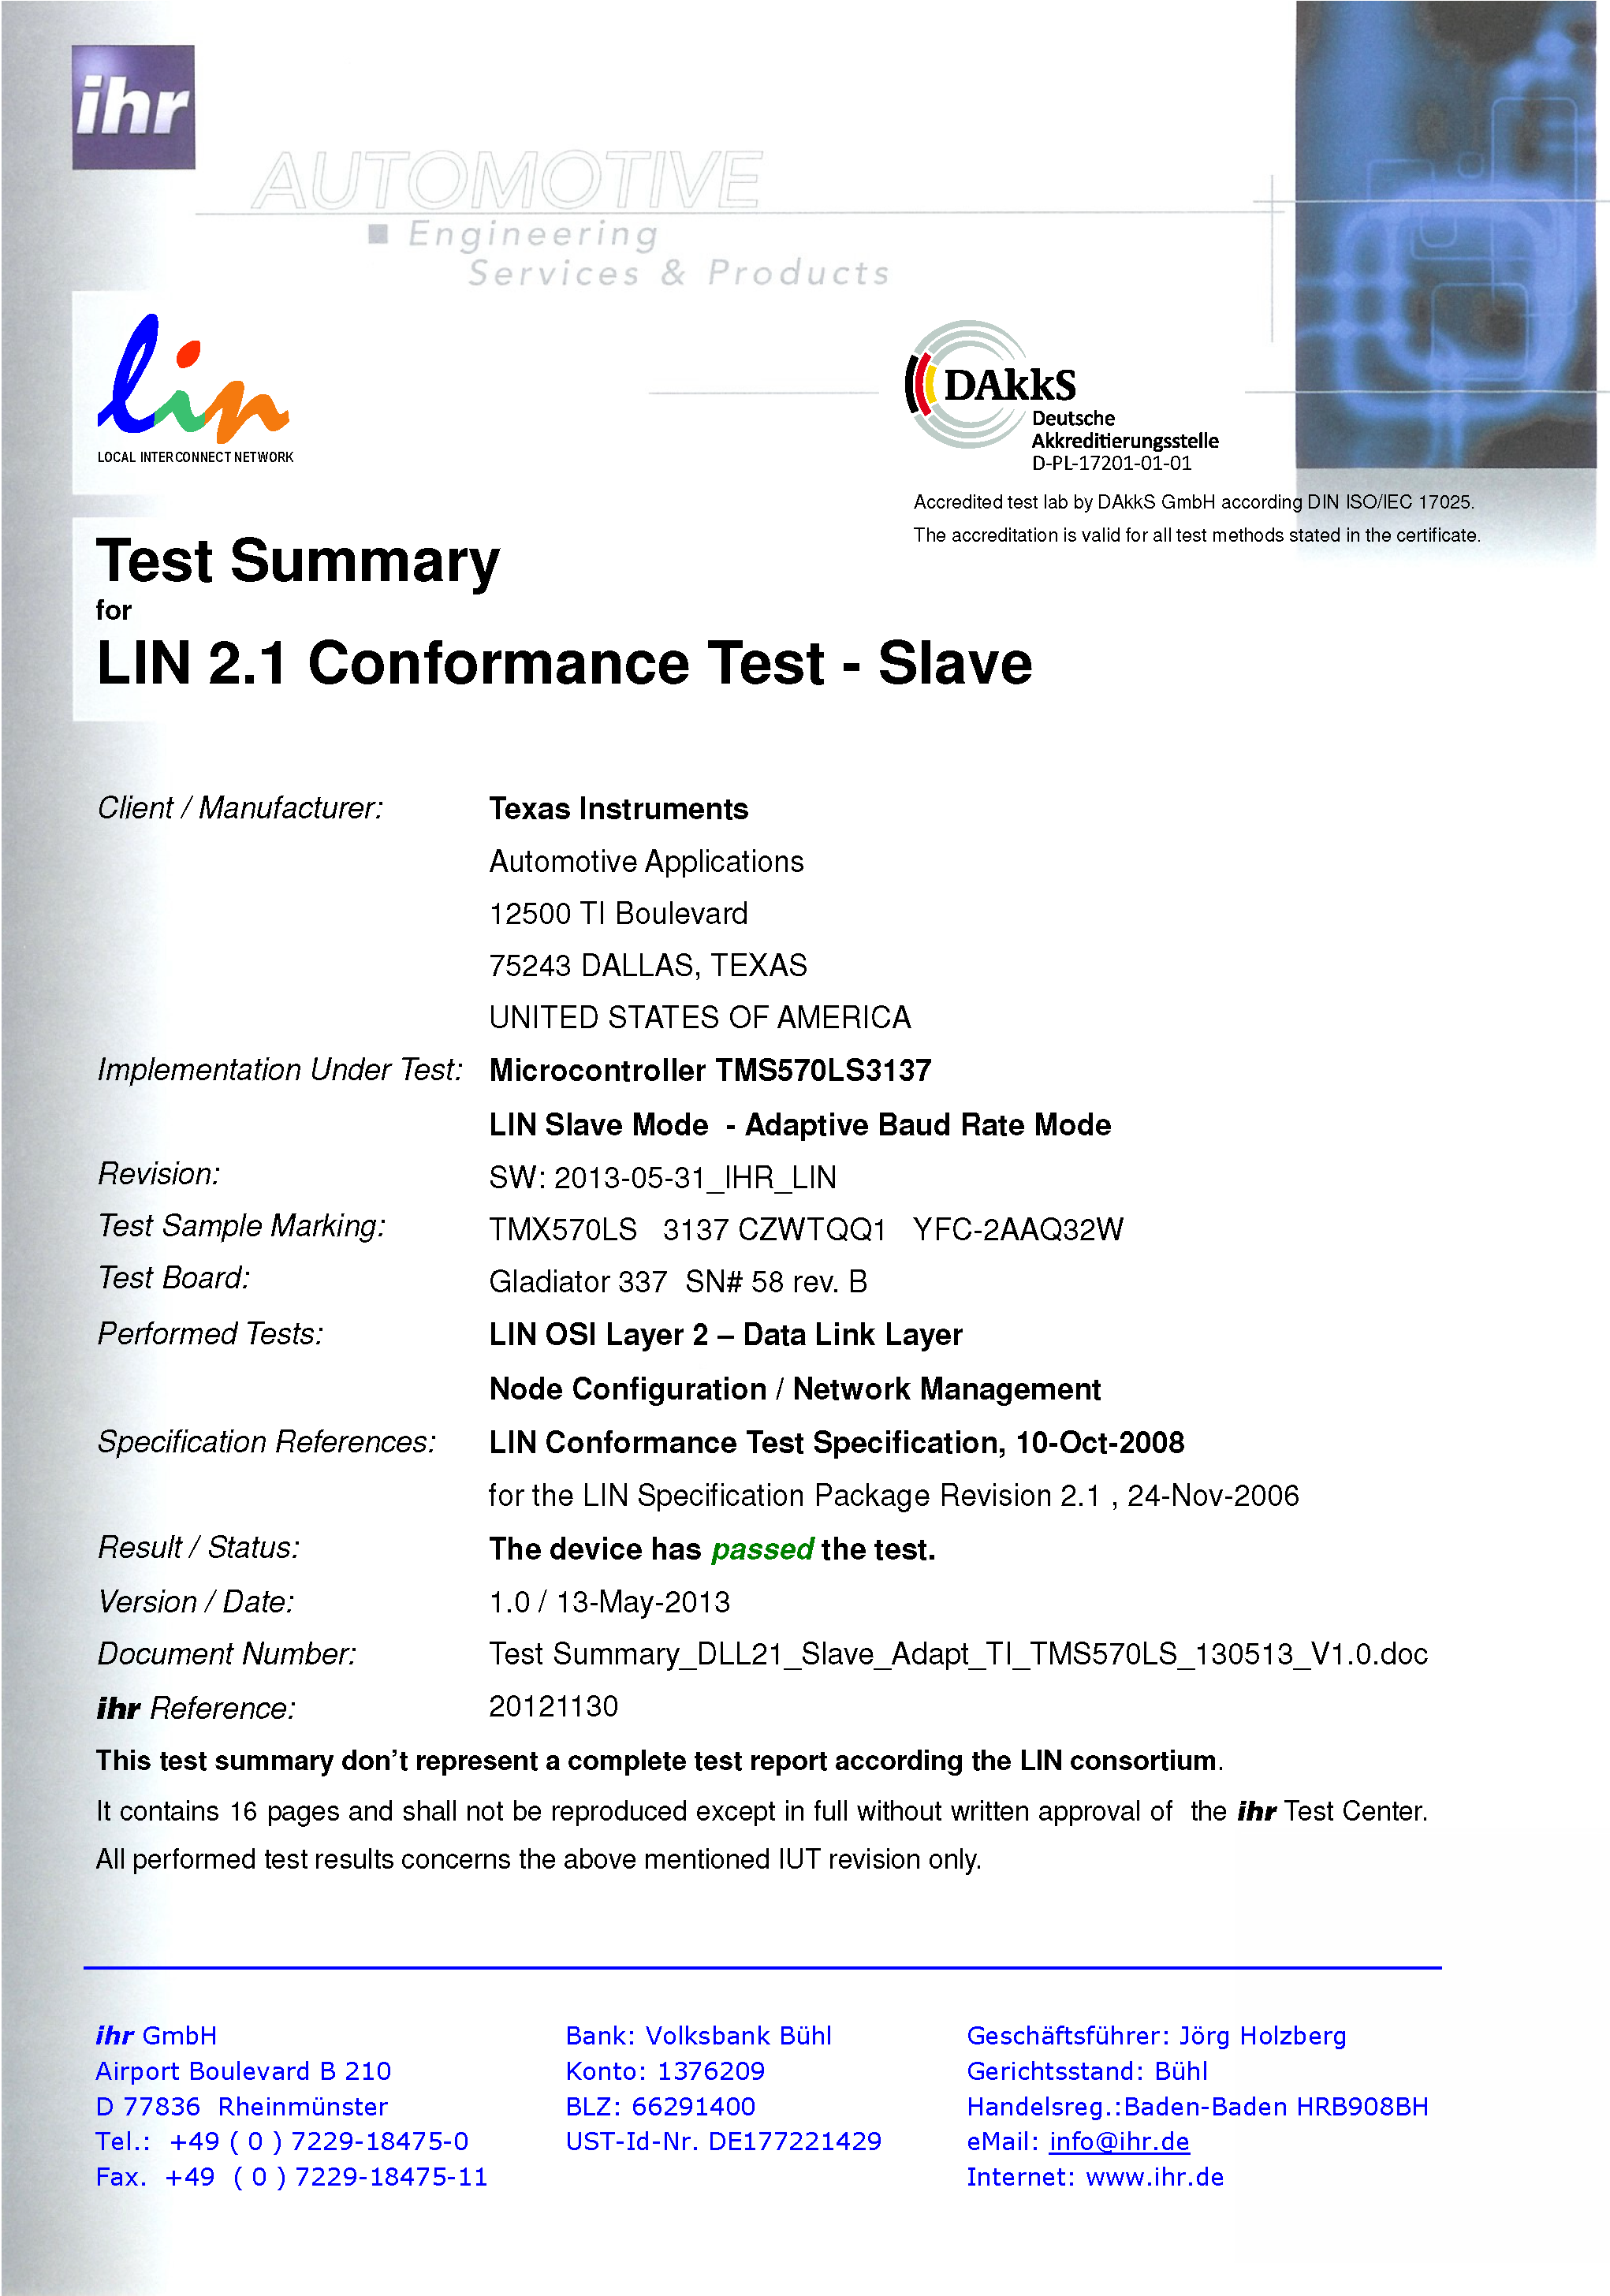 RM42L432 new_LIN_Certification_Slave_Adapt.png